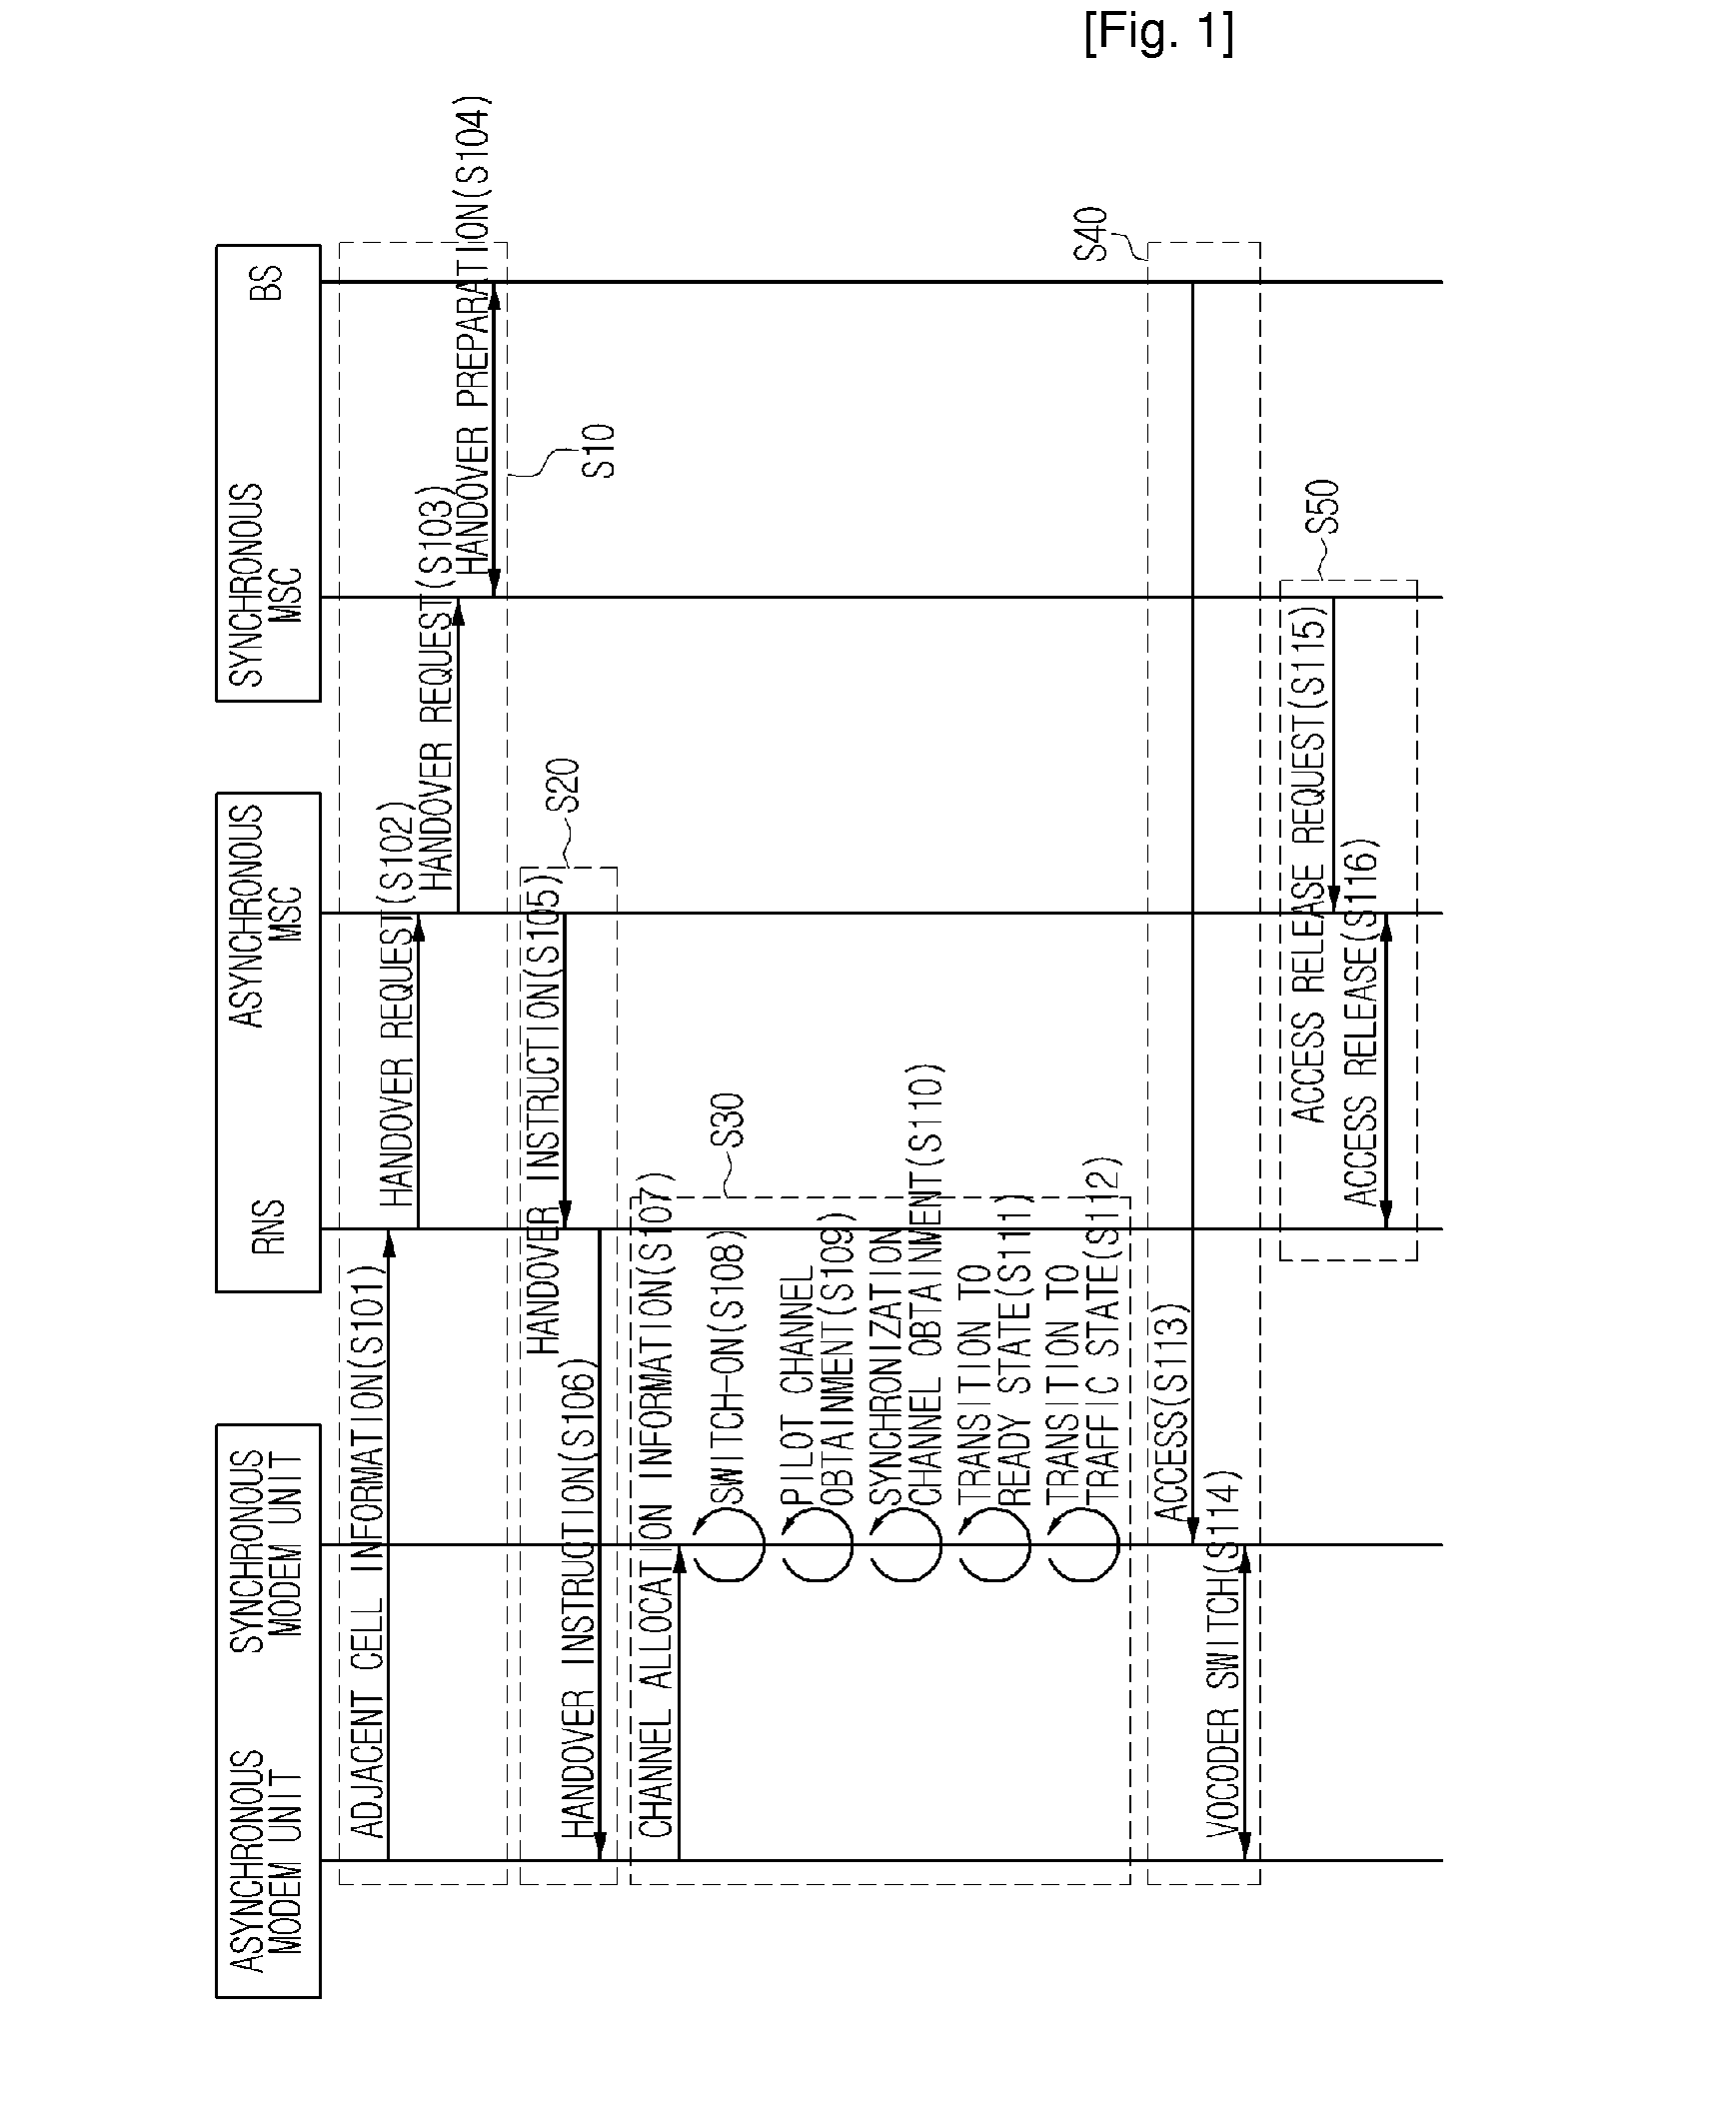 Handover Method for Mixed Mobile Communication System of Asynchronous Network and Synchronous Network